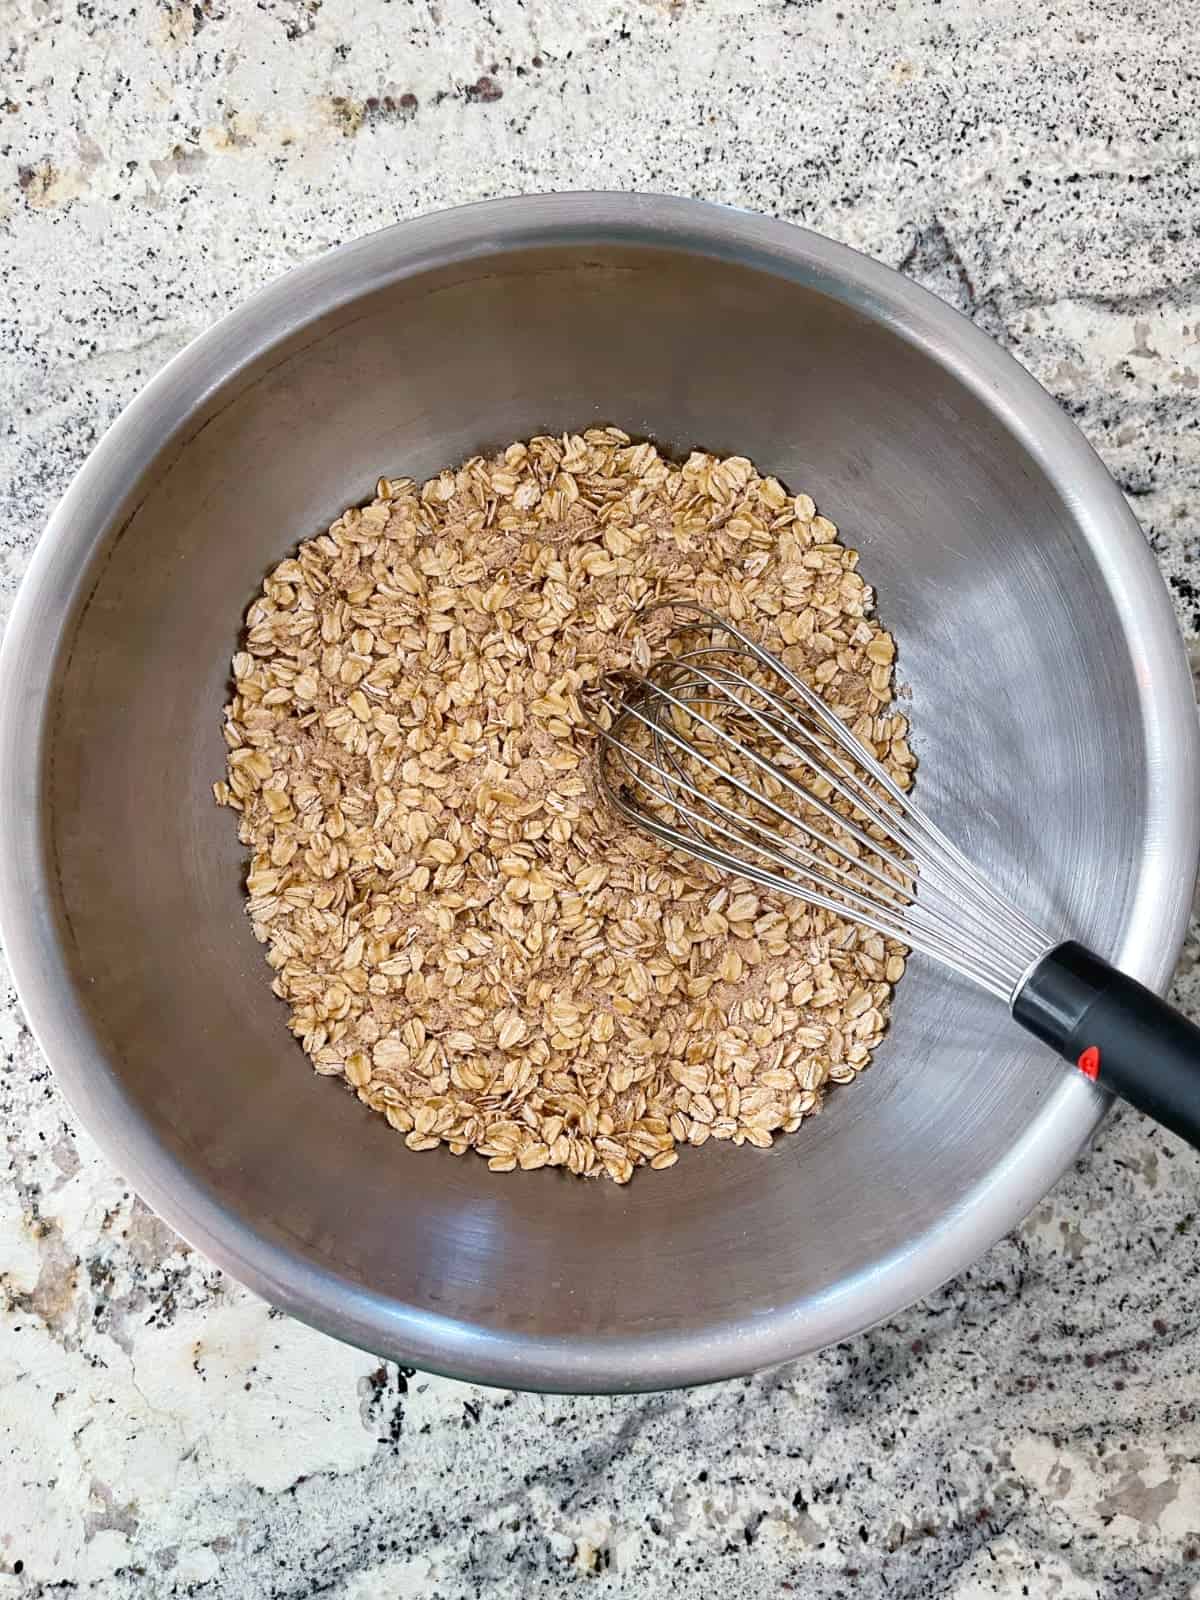 Rolled oats, almond flour, Truvia baking blend, ground nutmeg, cinnamon, baking soda and baking powder in mixing bowl with whisk.